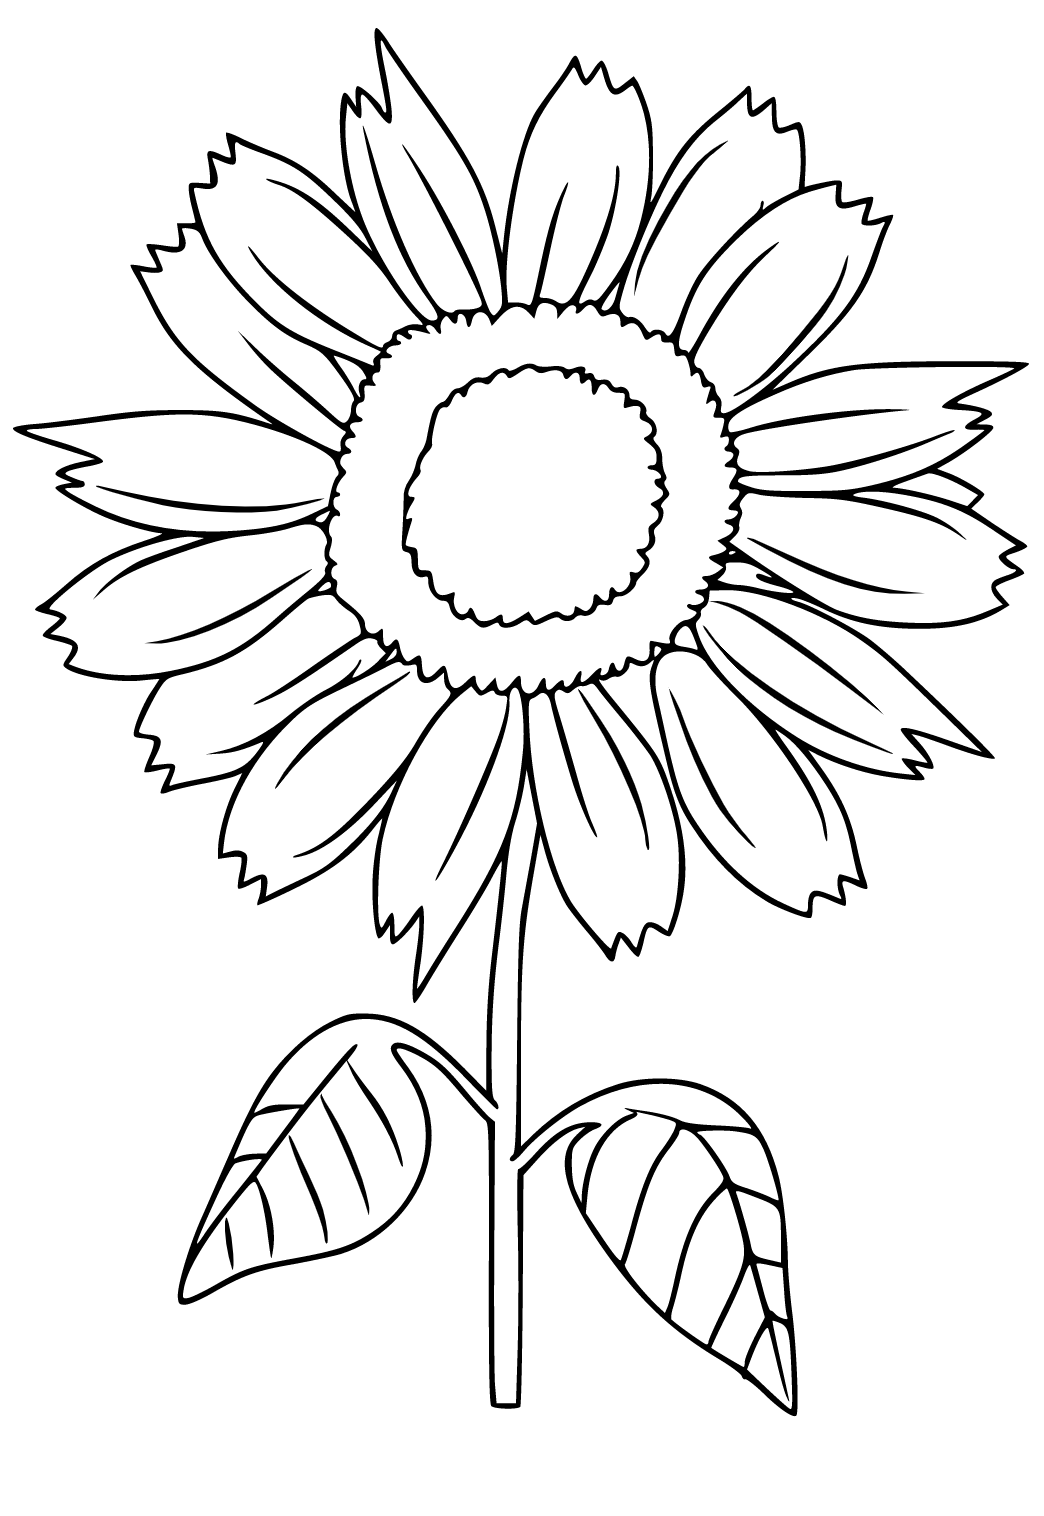 Free printable sunflower real coloring page for adults and kids